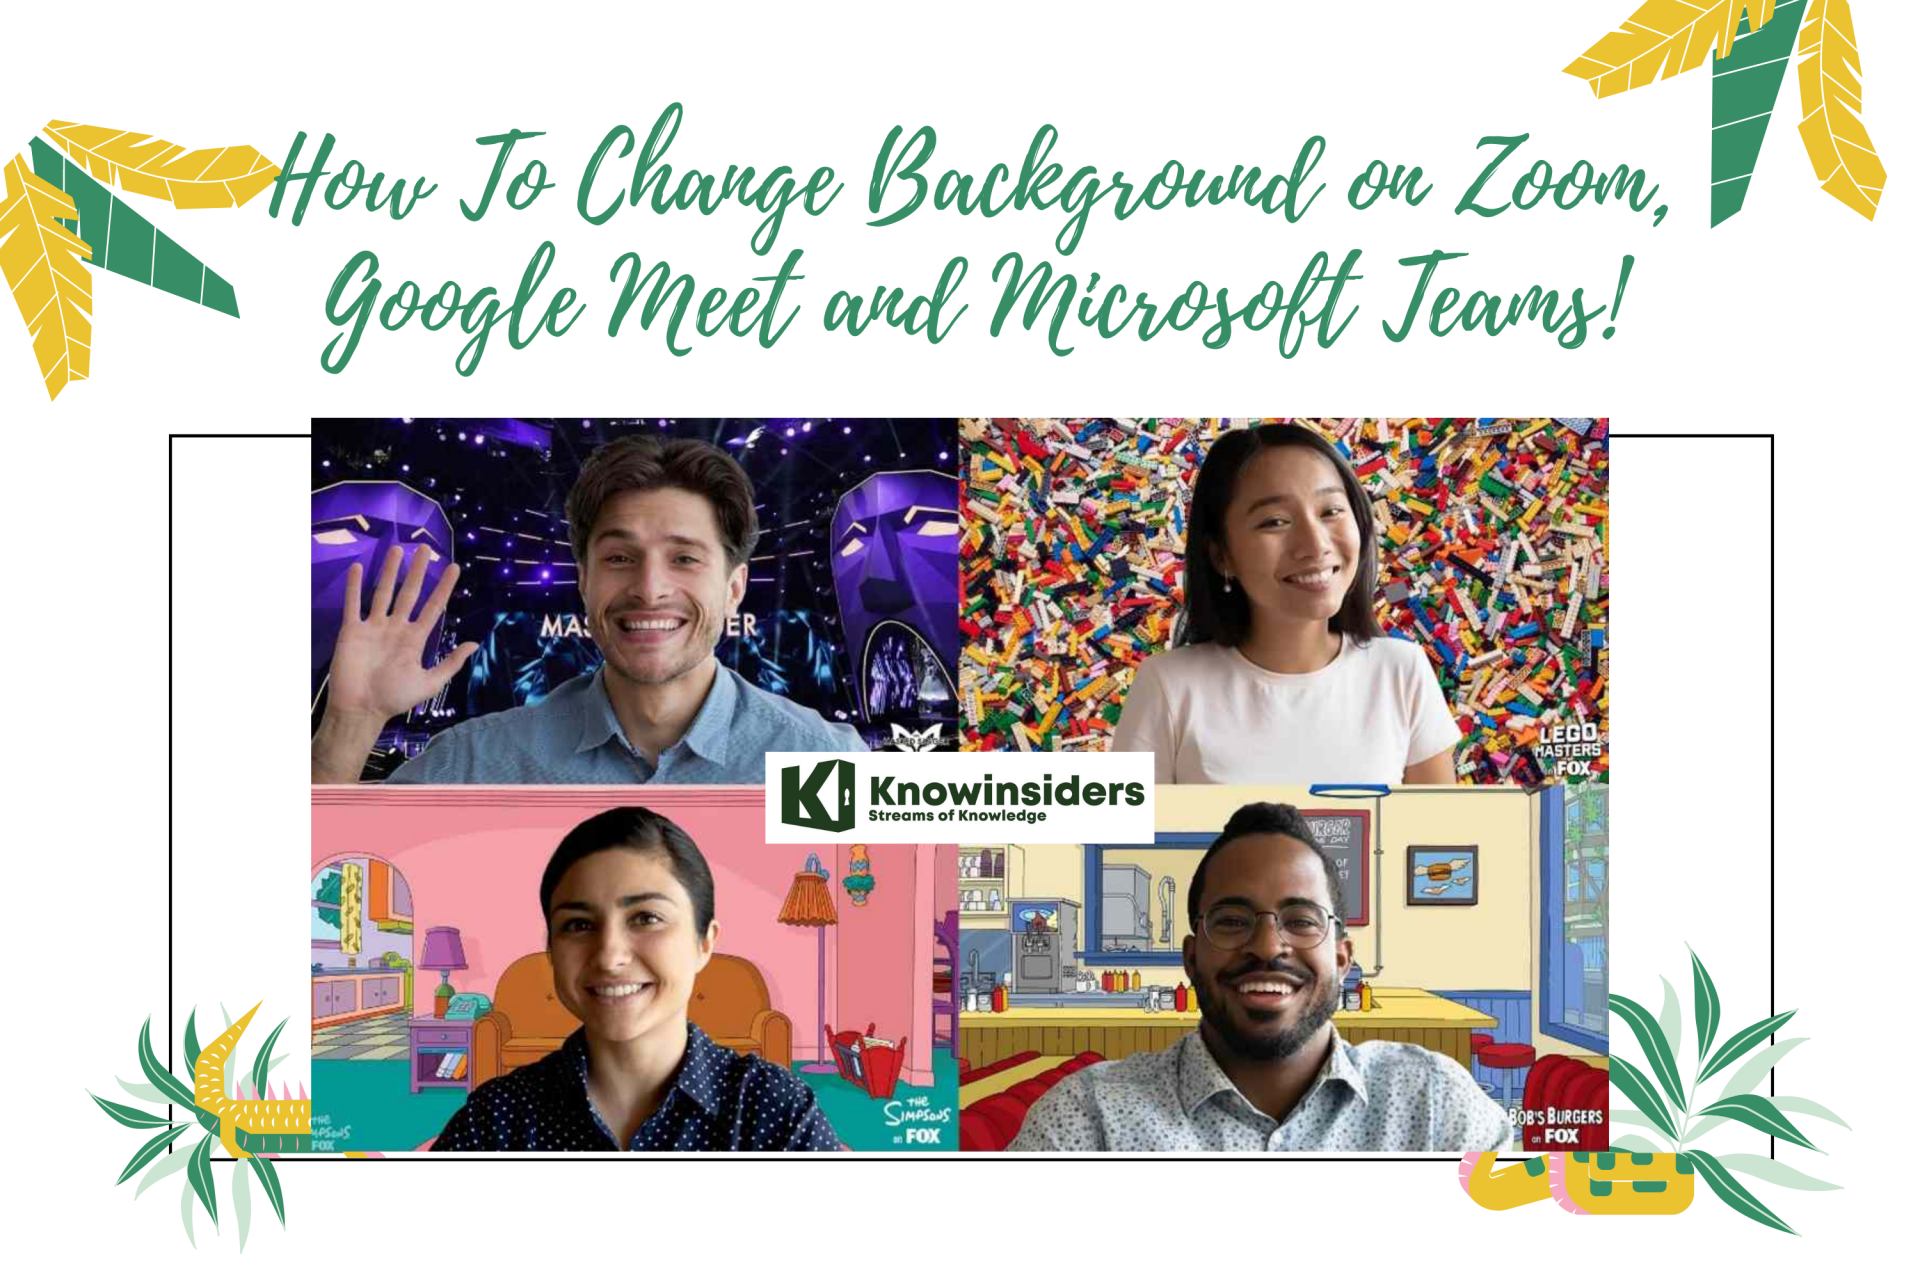 How To Change Background on Zoom, Google Meet and Microsoft Teams